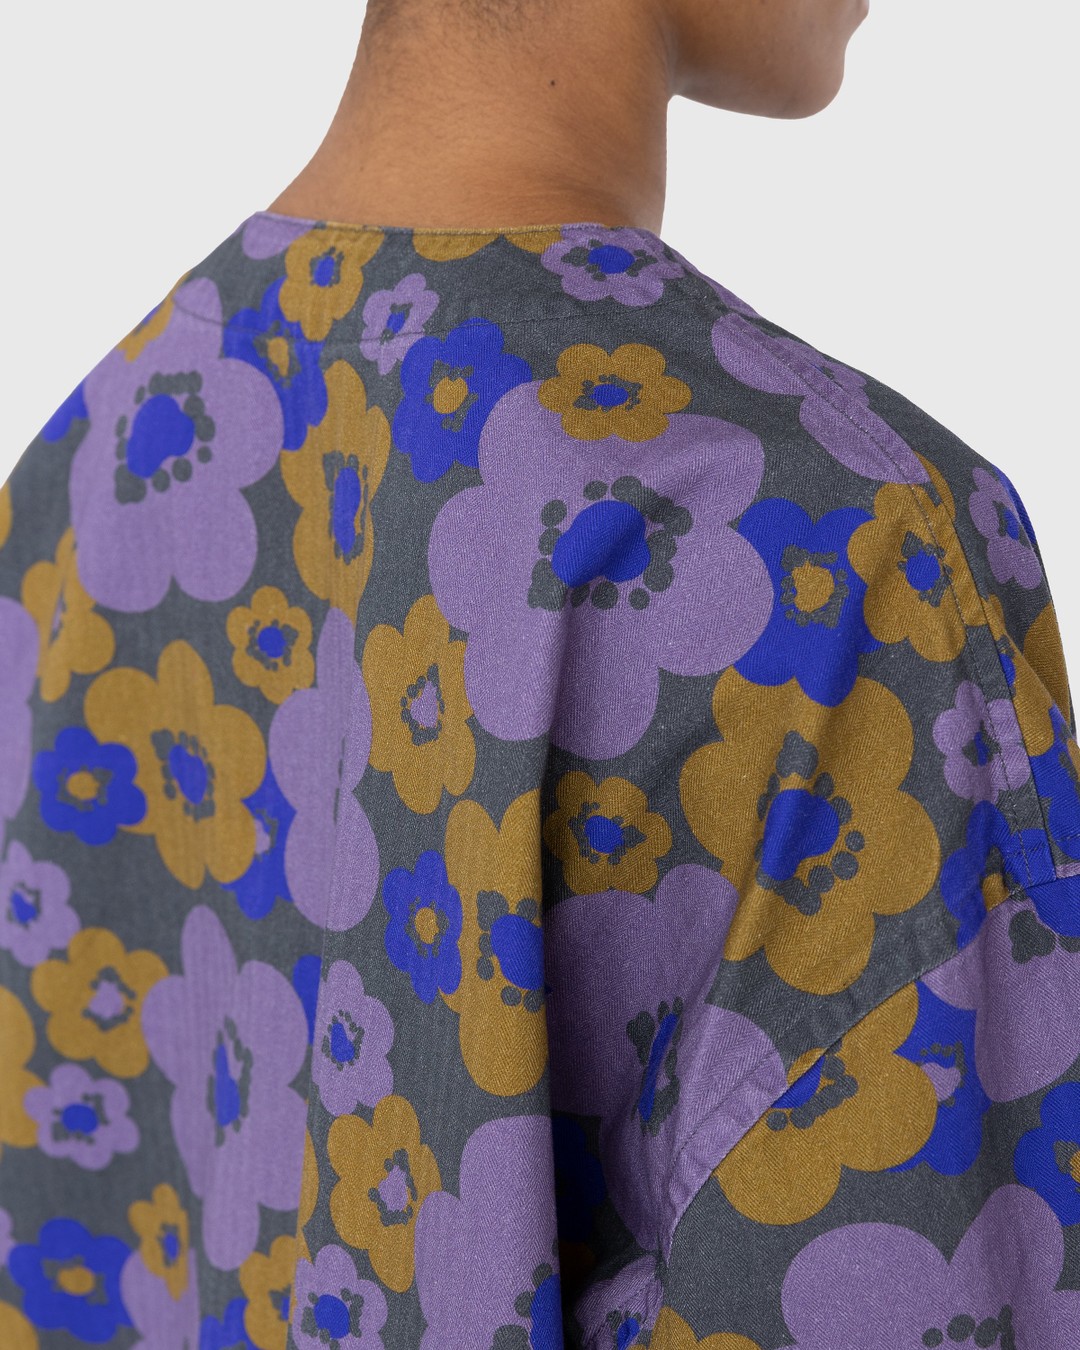 Acne Studios – Floral Short-Sleeve Button-Up Purple/Brown - Shortsleeve Shirts - Multi - Image 6